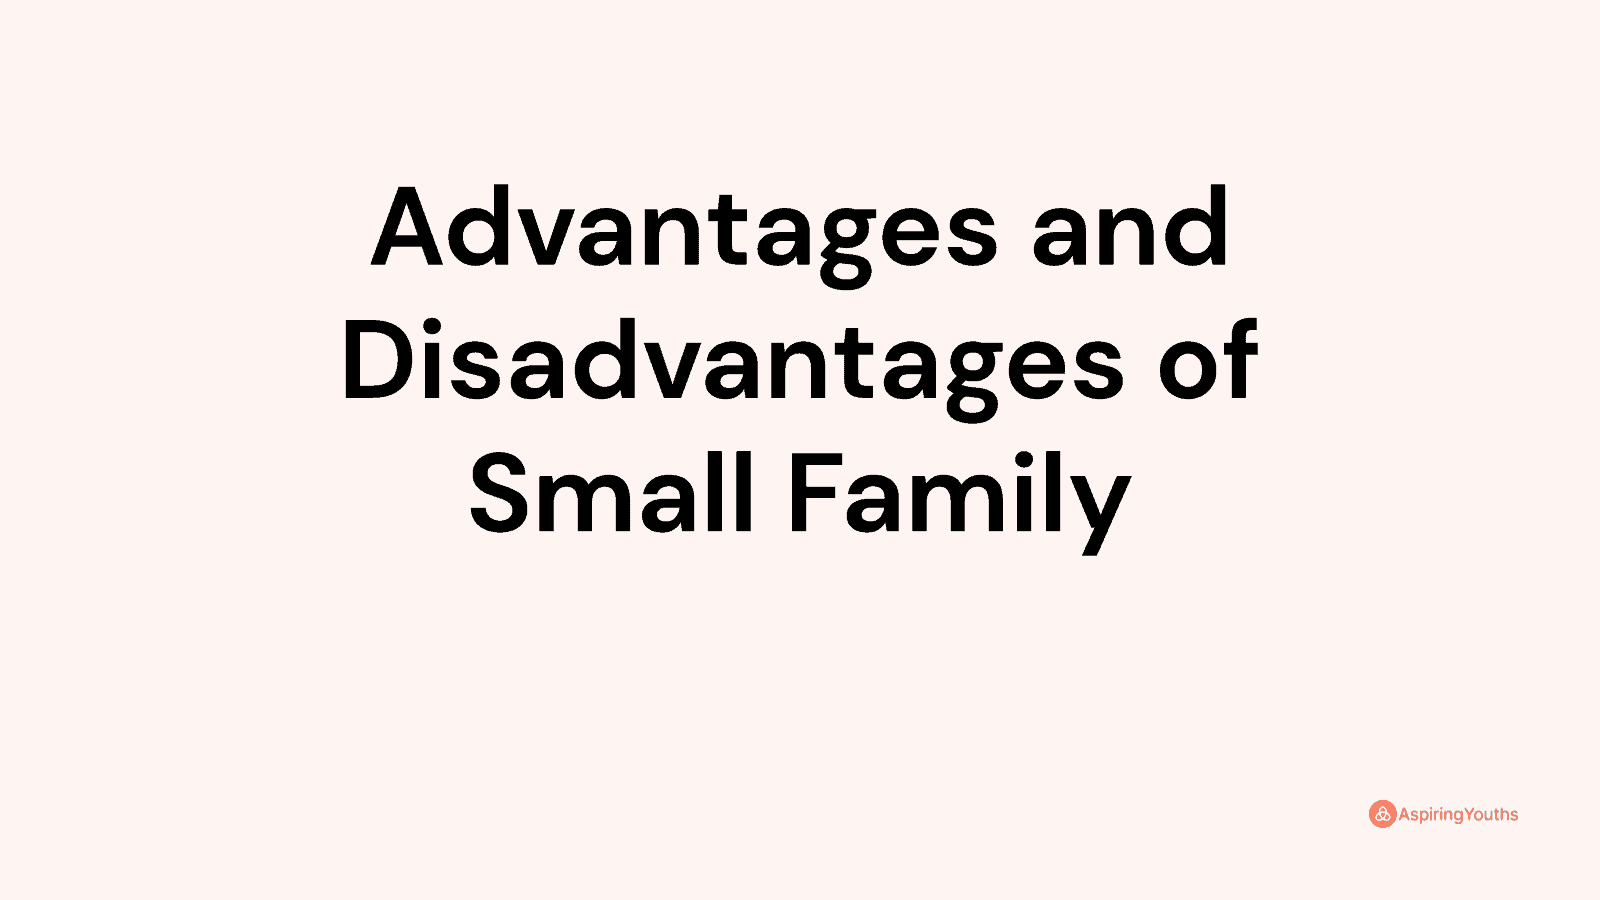 disadvantages of small family essay